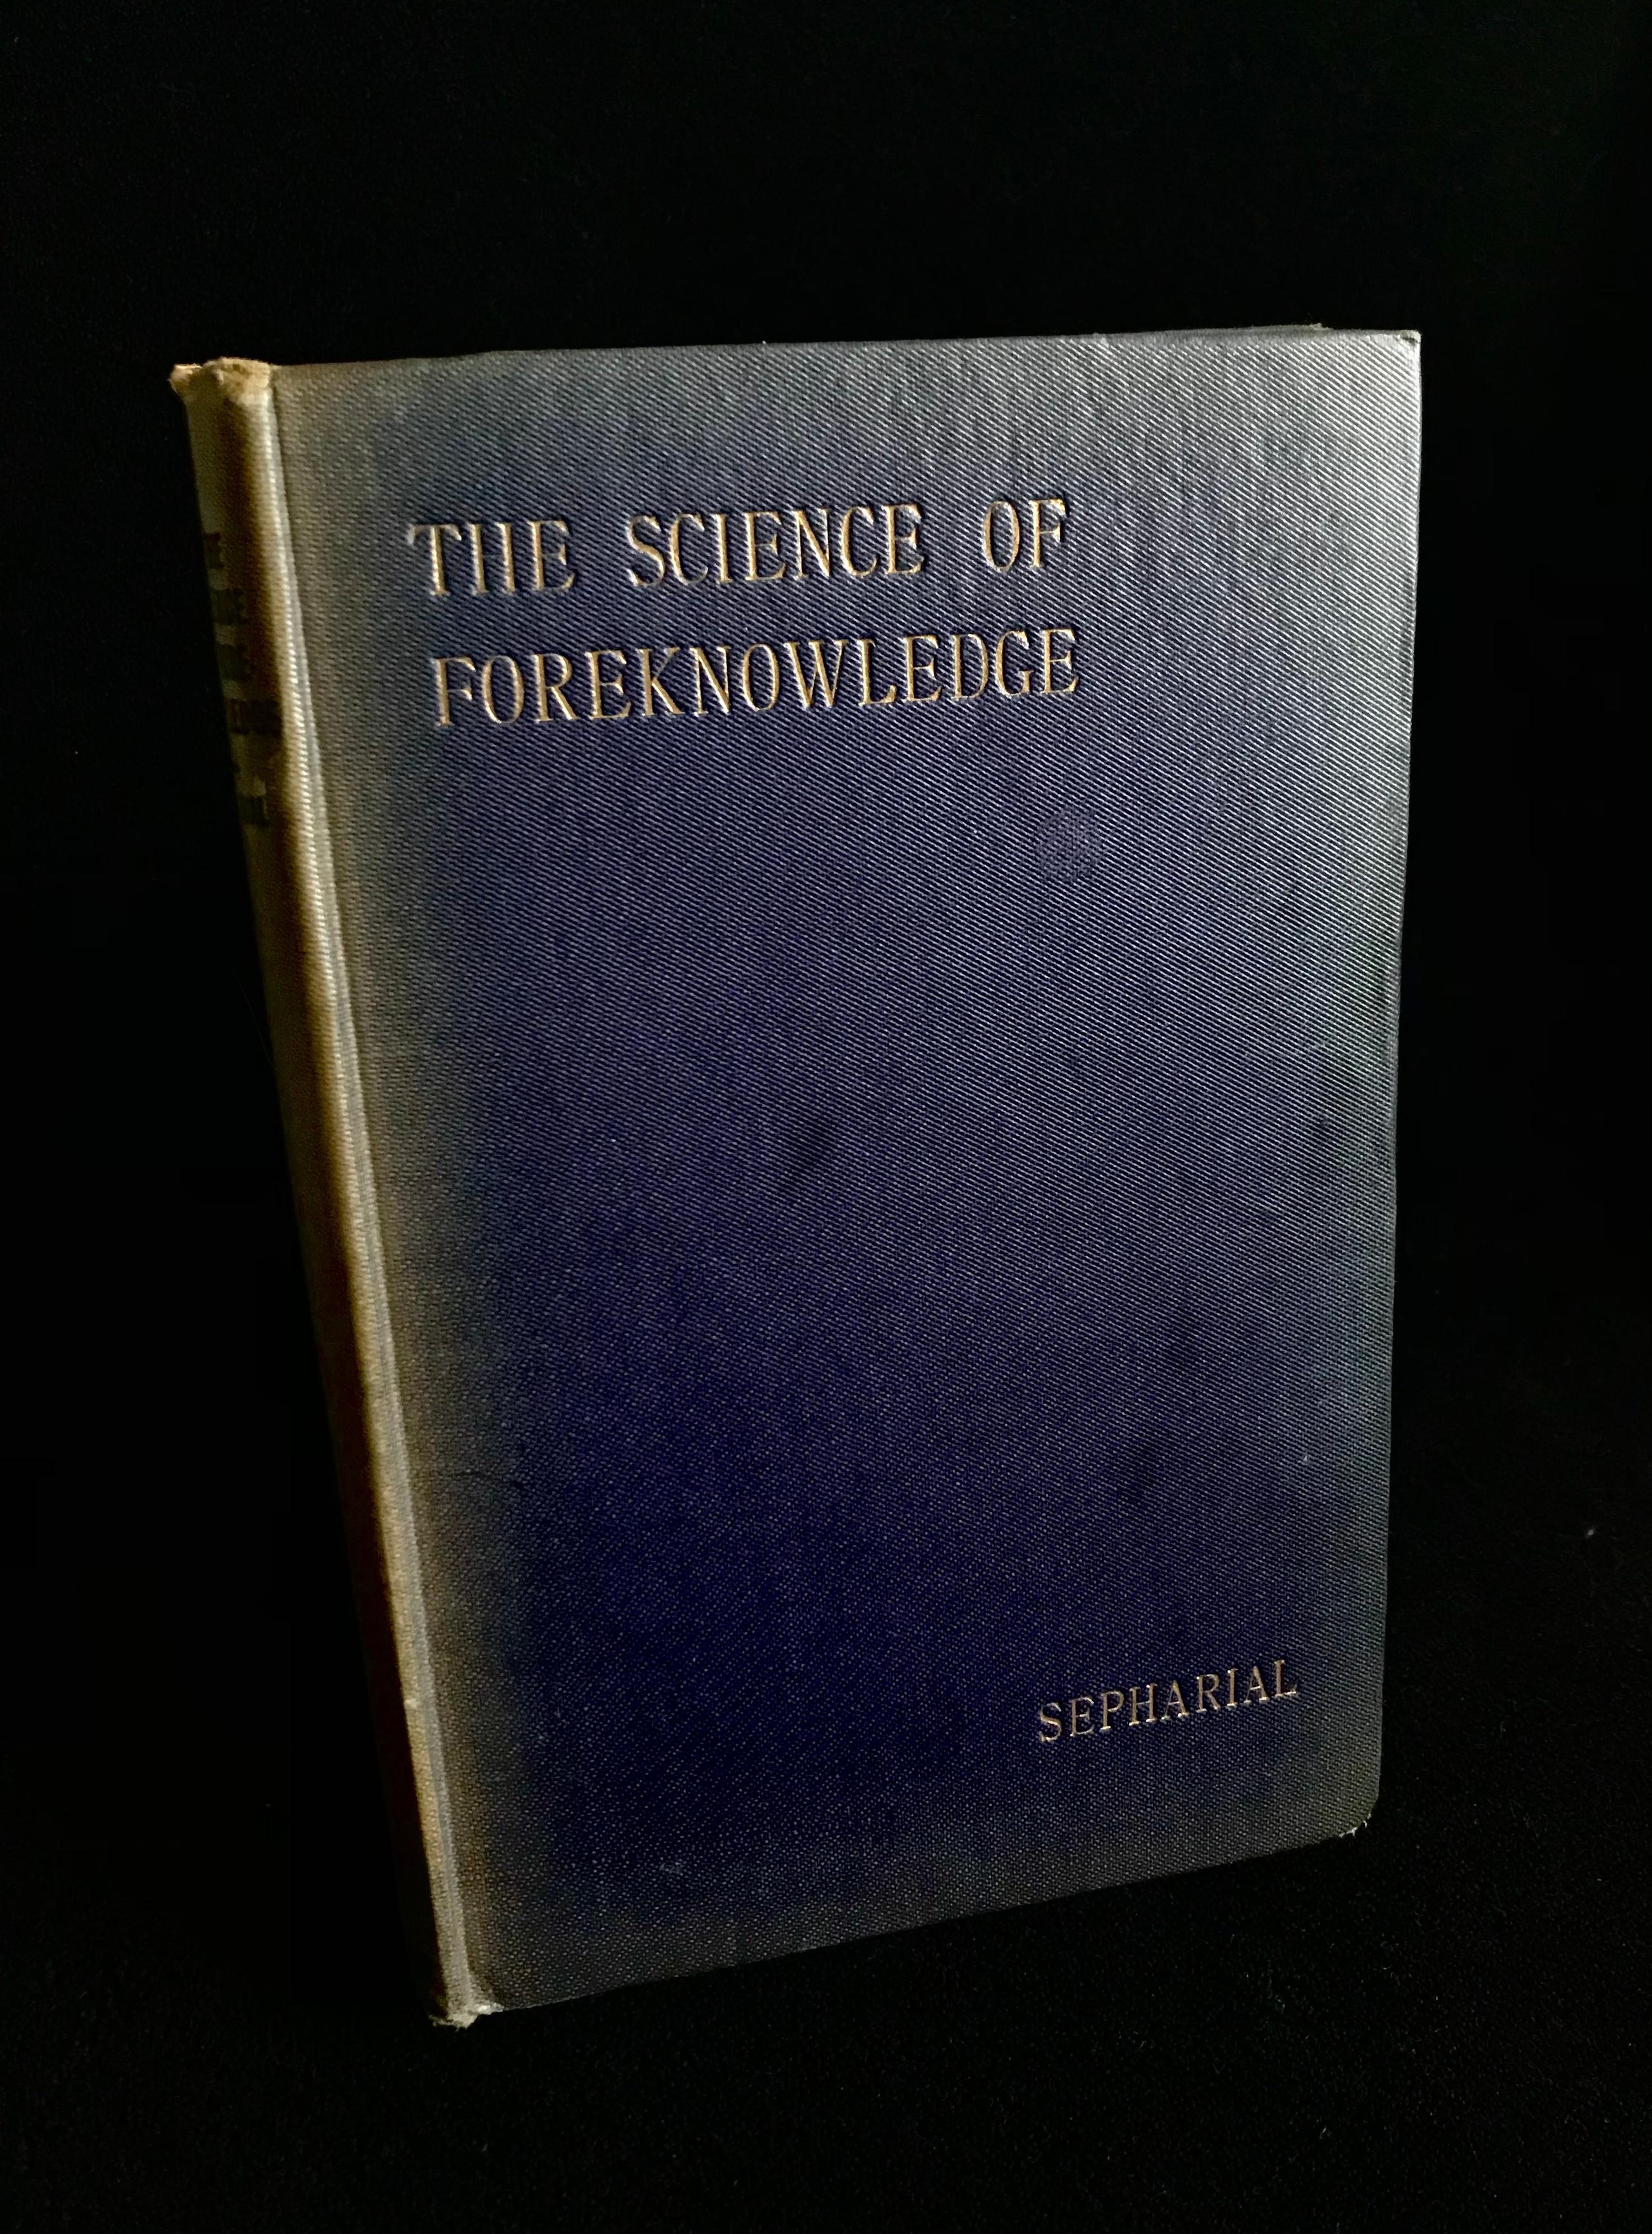 The Science of Foreknowledge by Sepharial